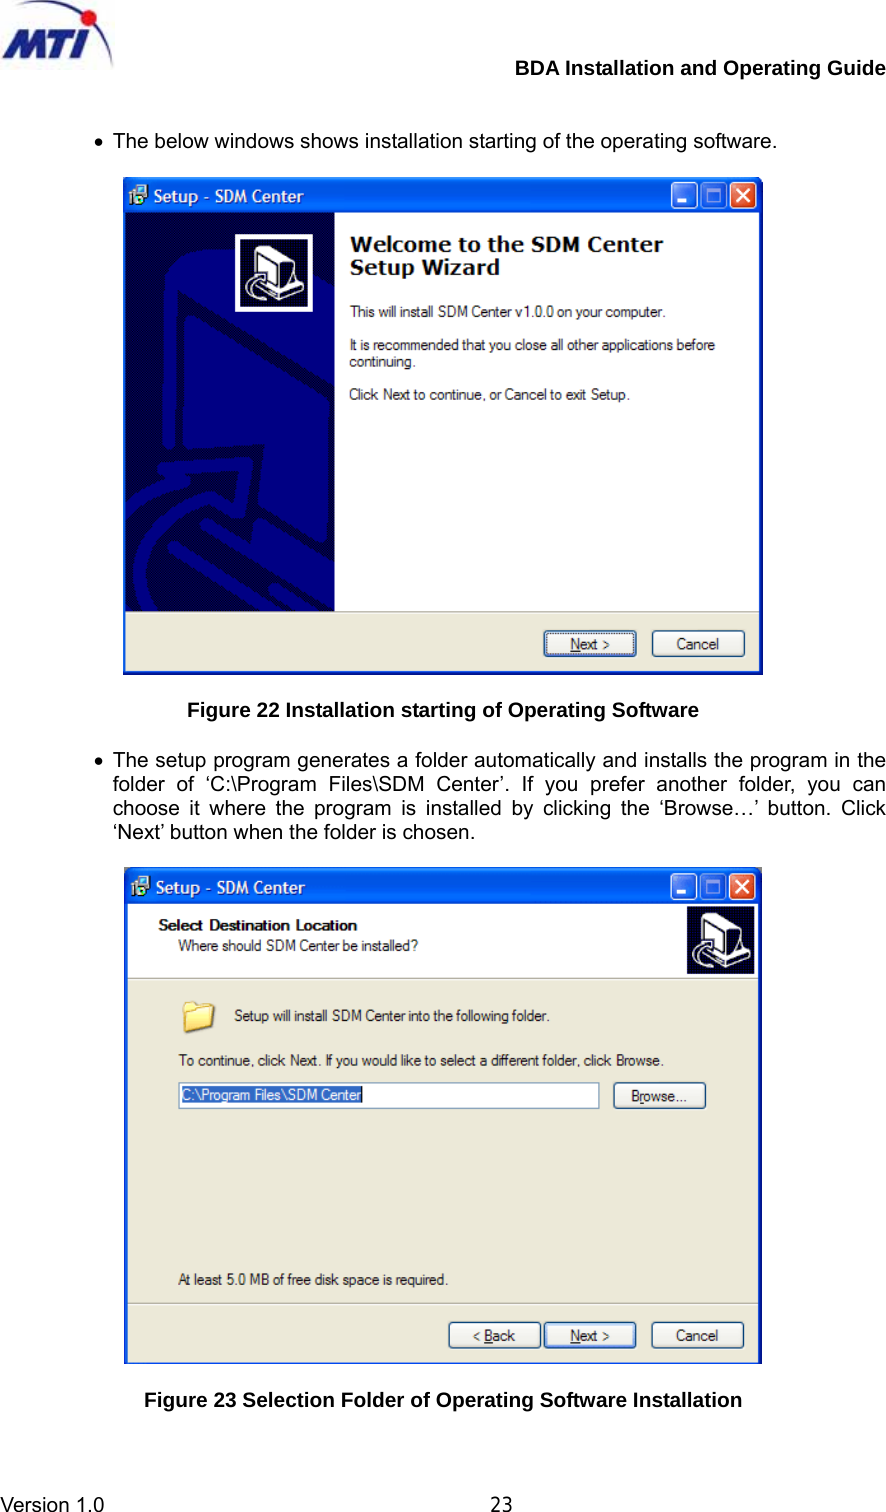         BDA Installation and Operating Guide Version 1.0                                       23   •  The below windows shows installation starting of the operating software.    Figure 22 Installation starting of Operating Software  • The setup program generates a folder automatically and installs the program in the folder of ‘C:\Program Files\SDM Center’. If you prefer another folder, you can choose it where the program is installed by clicking the ‘Browse…’ button. Click ‘Next’ button when the folder is chosen.    Figure 23 Selection Folder of Operating Software Installation  